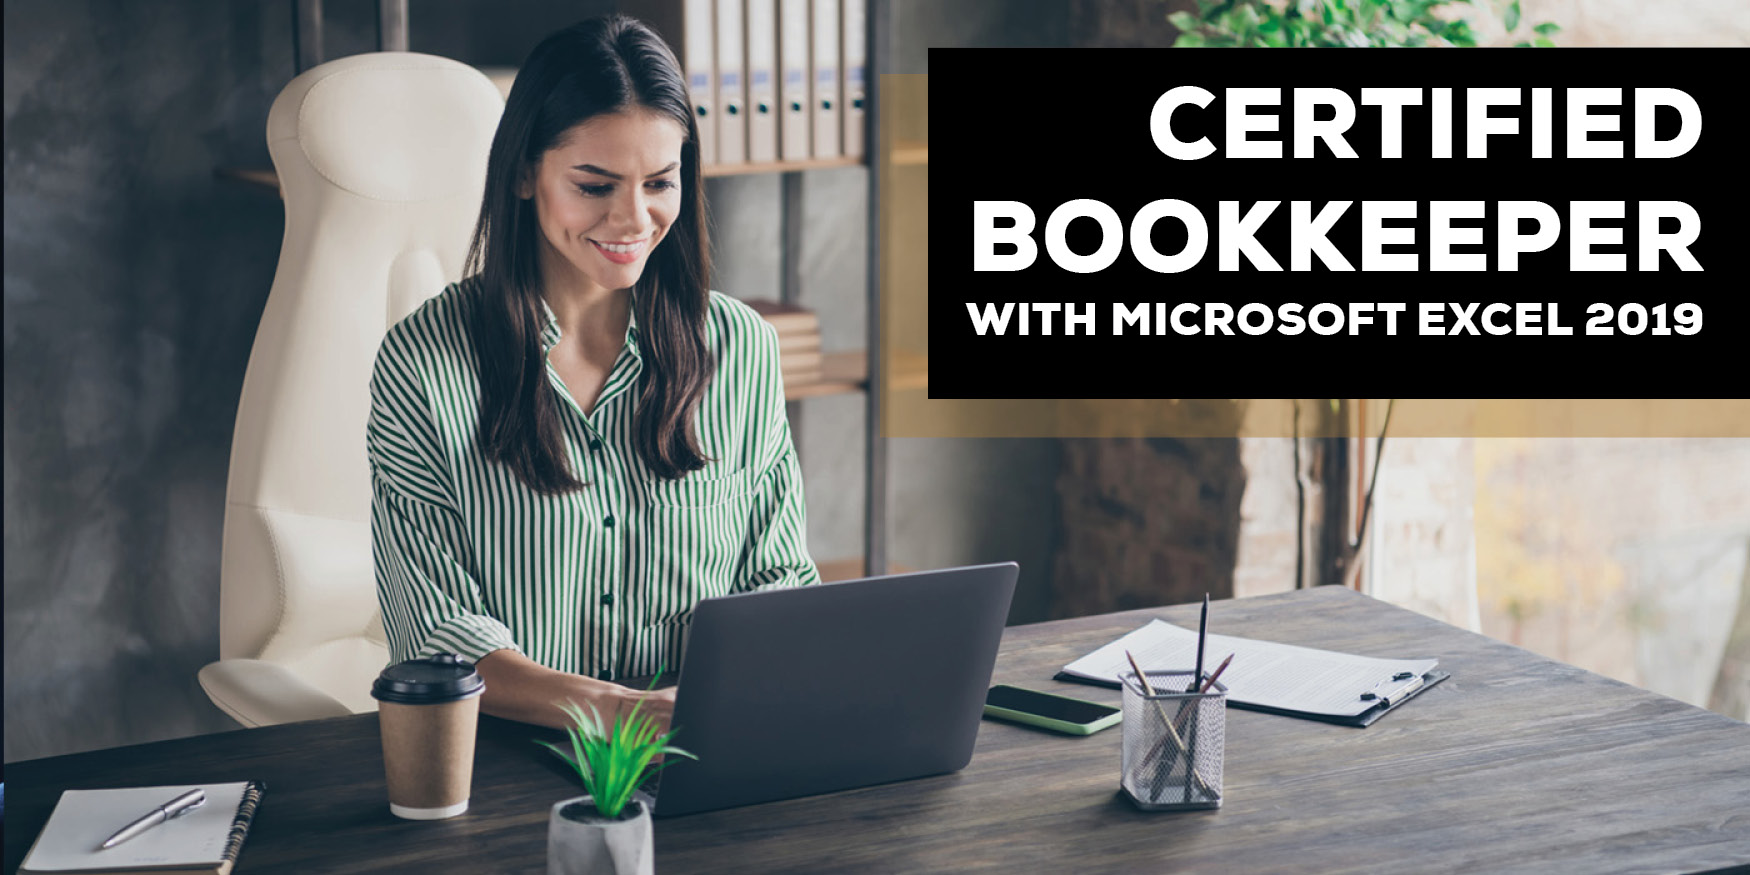 CERTIFIED BOOKKEEPER WITH MICROSOFT EXCEL 2019